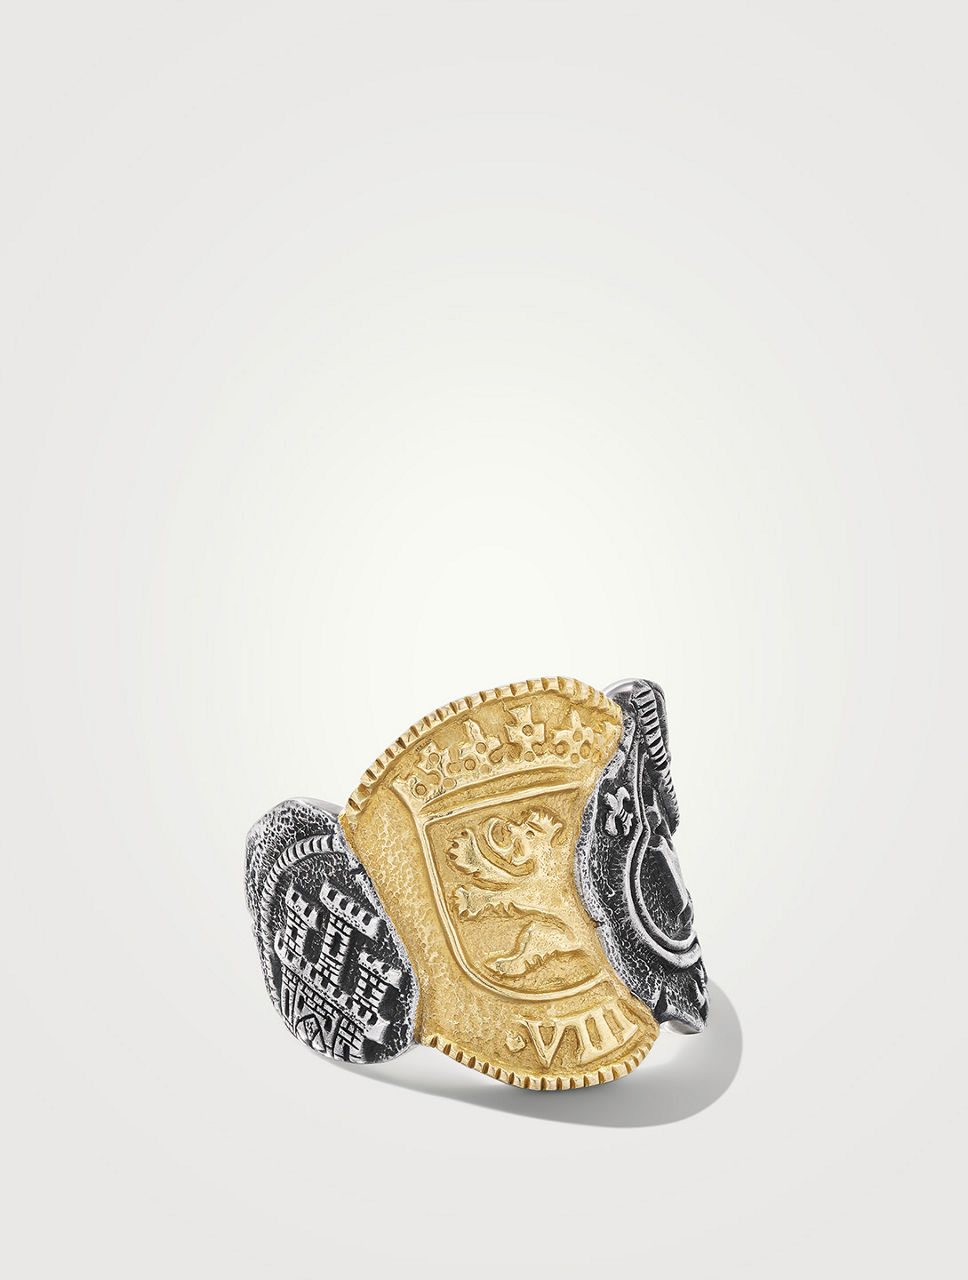 Shipwreck Cigar Band Ring Sterling Silver With 18k Yellow Gold, 15mm